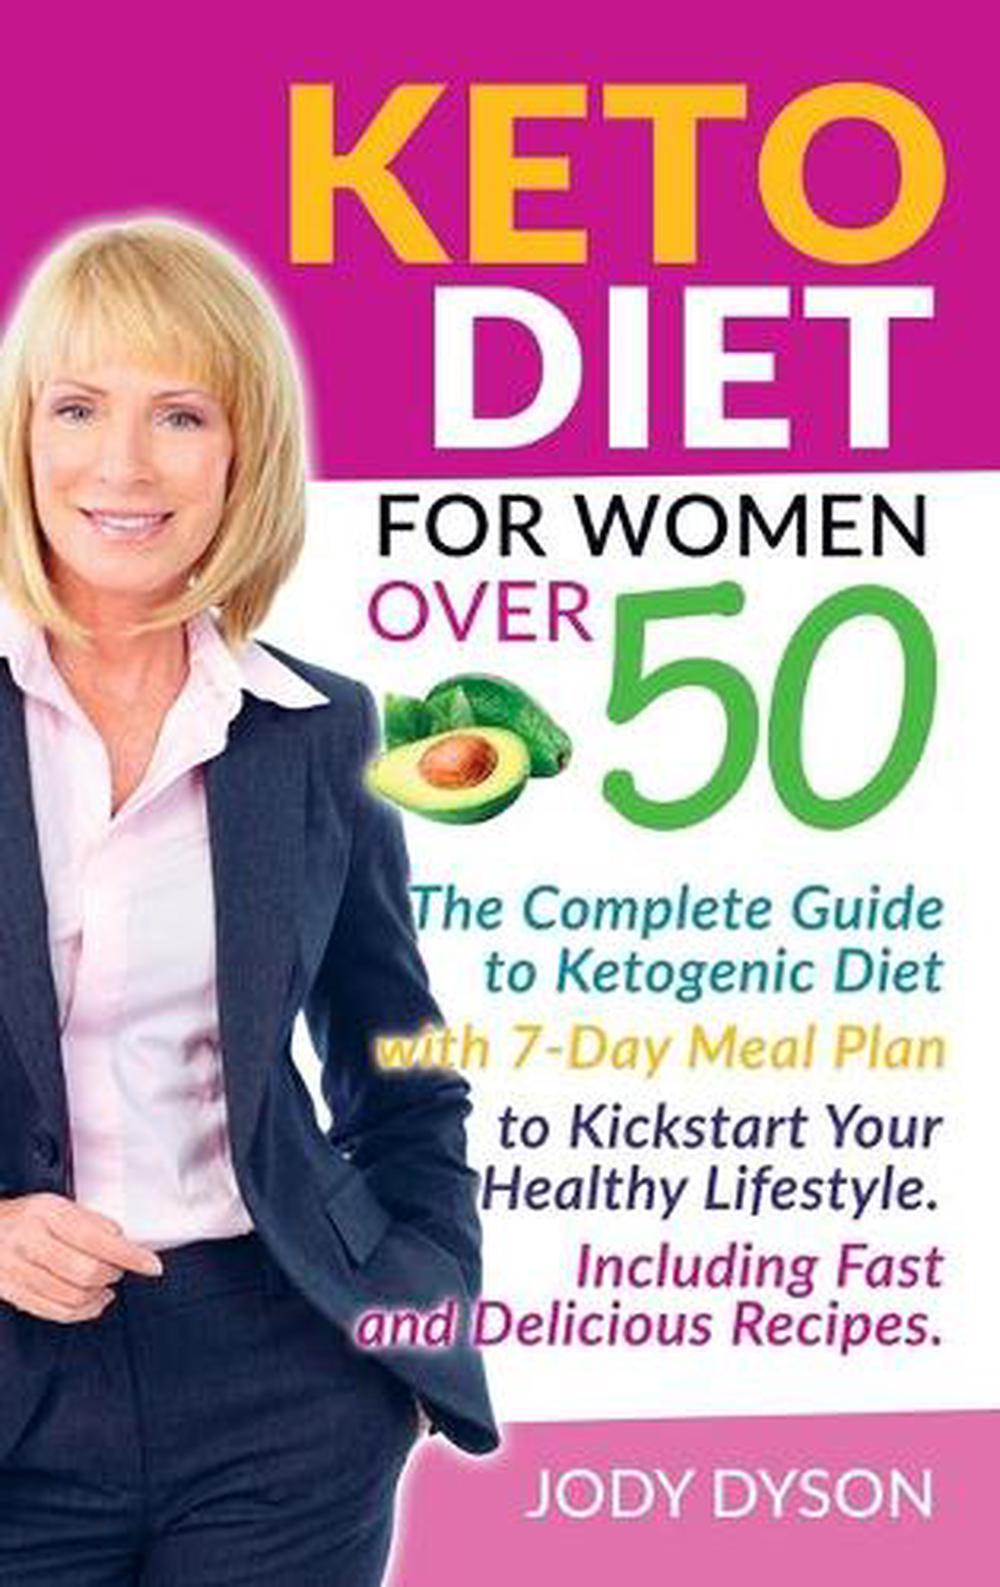 Keto Diet for Women Over 50: The Complete Guide to Ketogenic Diet with ...